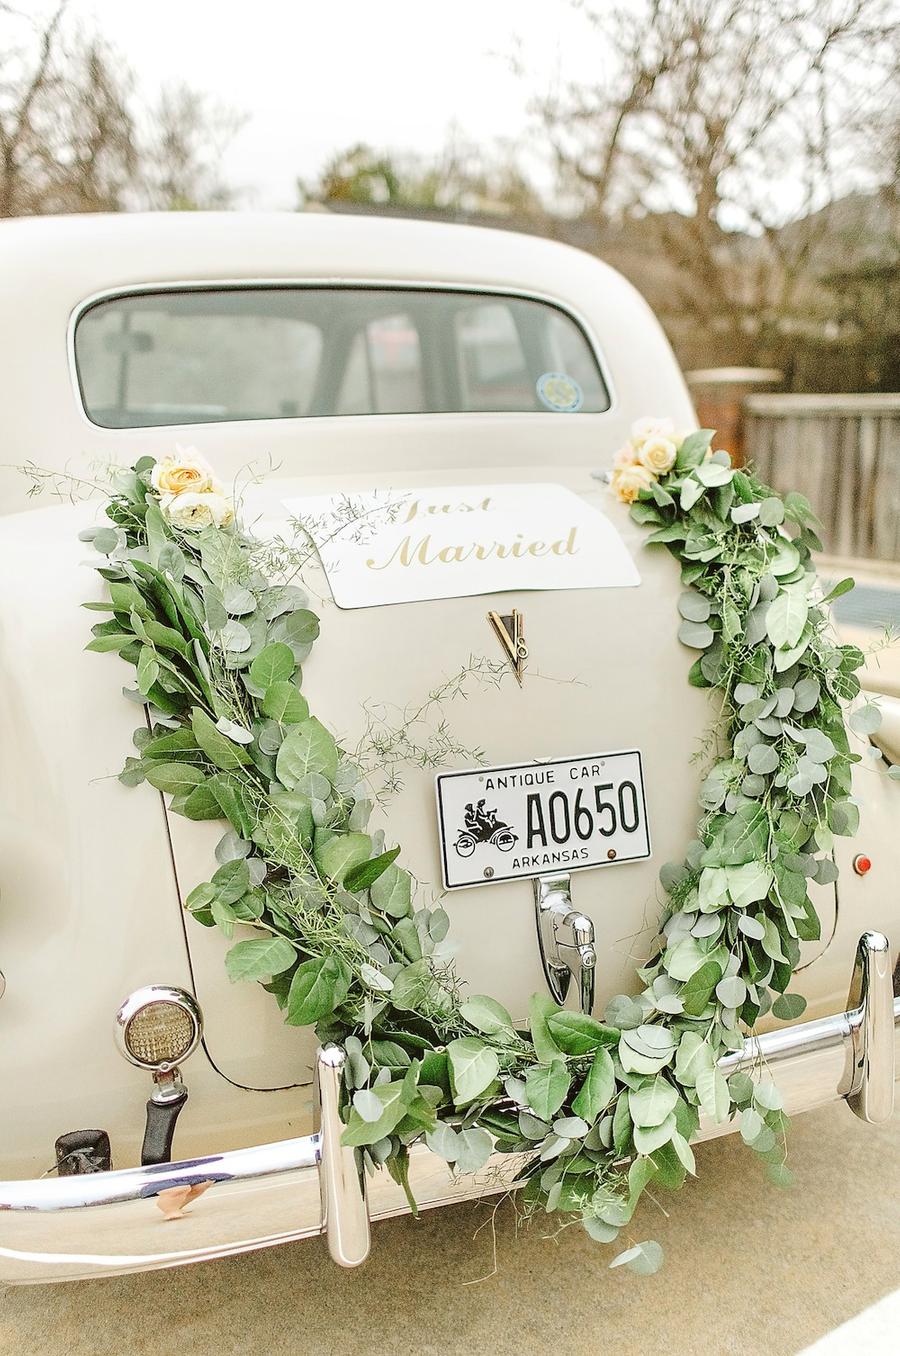 Just Married Banner-30+ Creative Ideas to Decorate Your Wedding Car